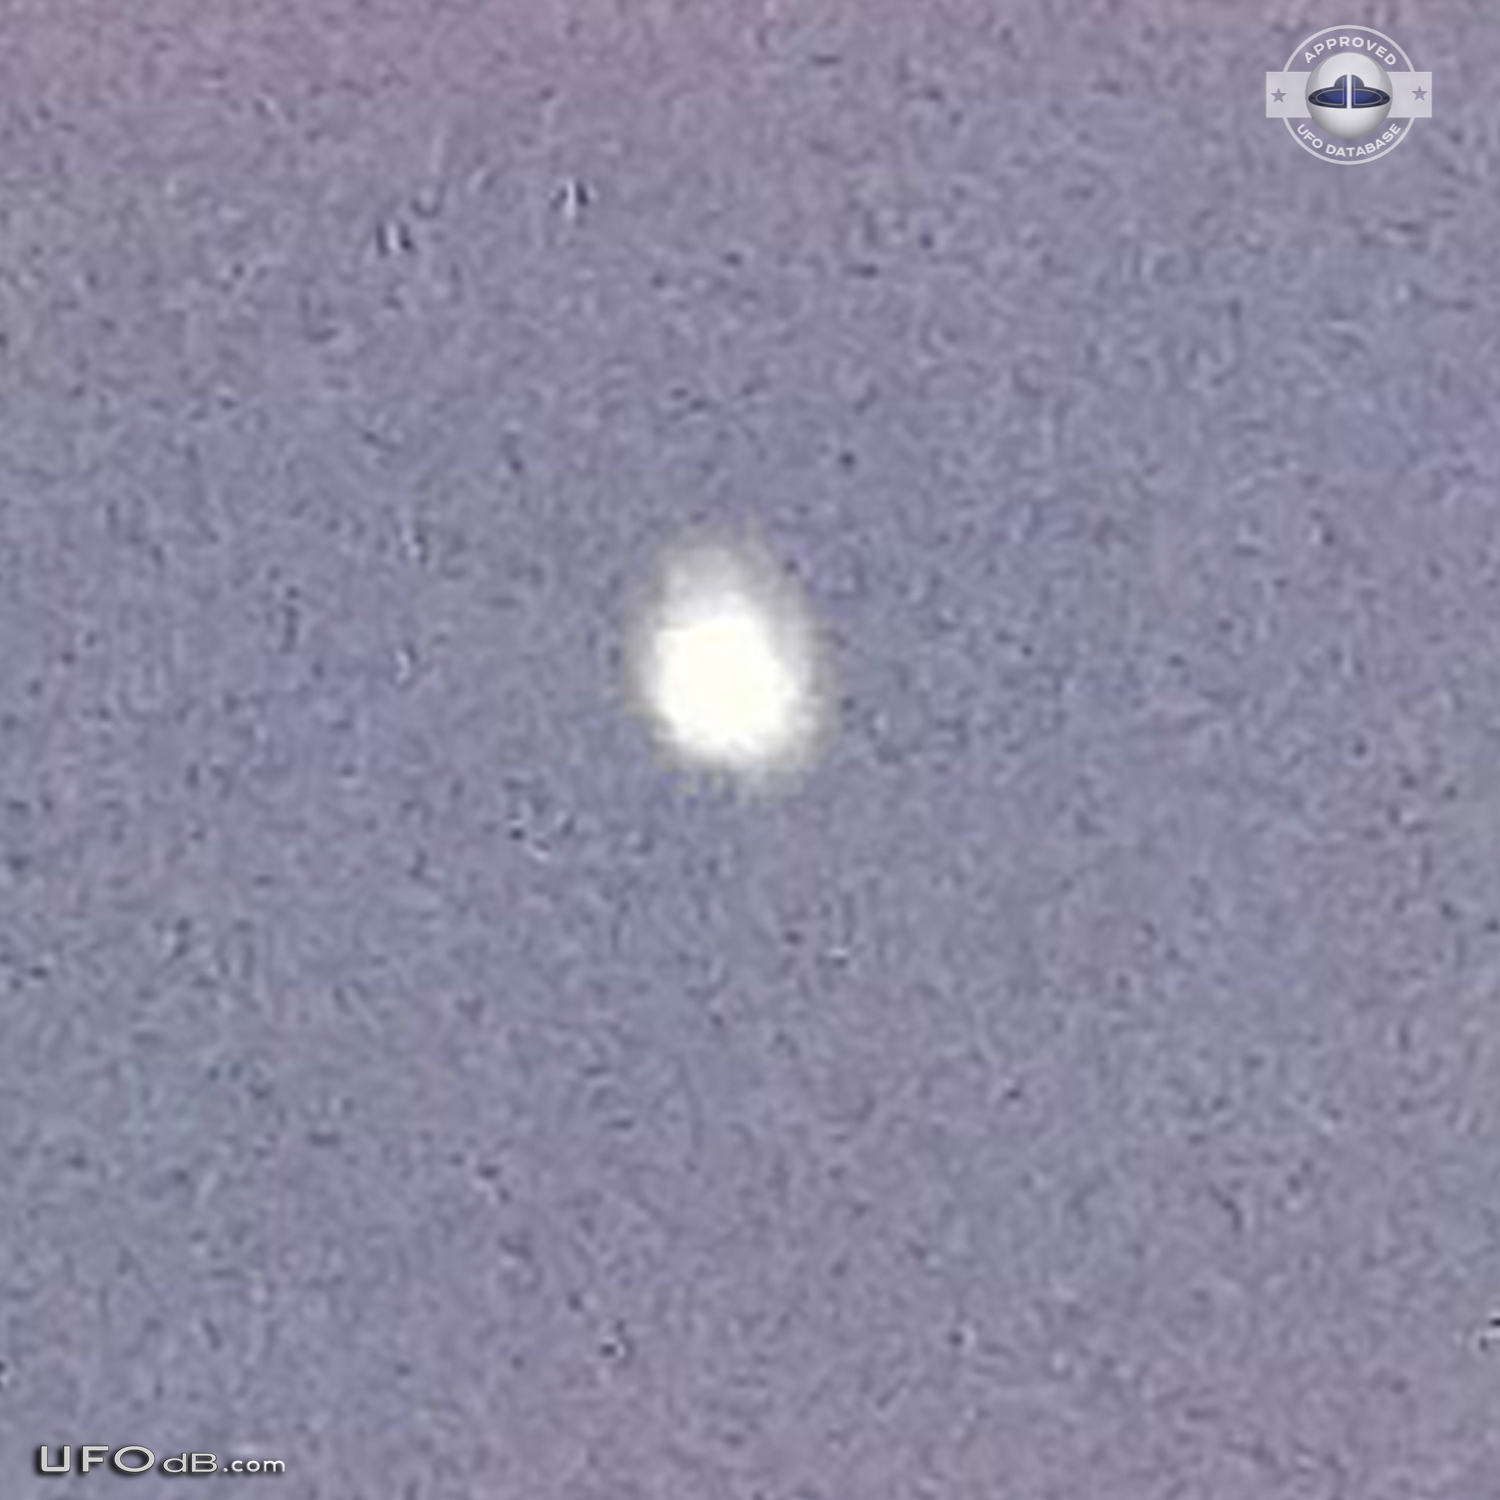 White fluffy Orb UFO caught on photo in the sky of Butte, Montana 2012 UFO Picture #517-3